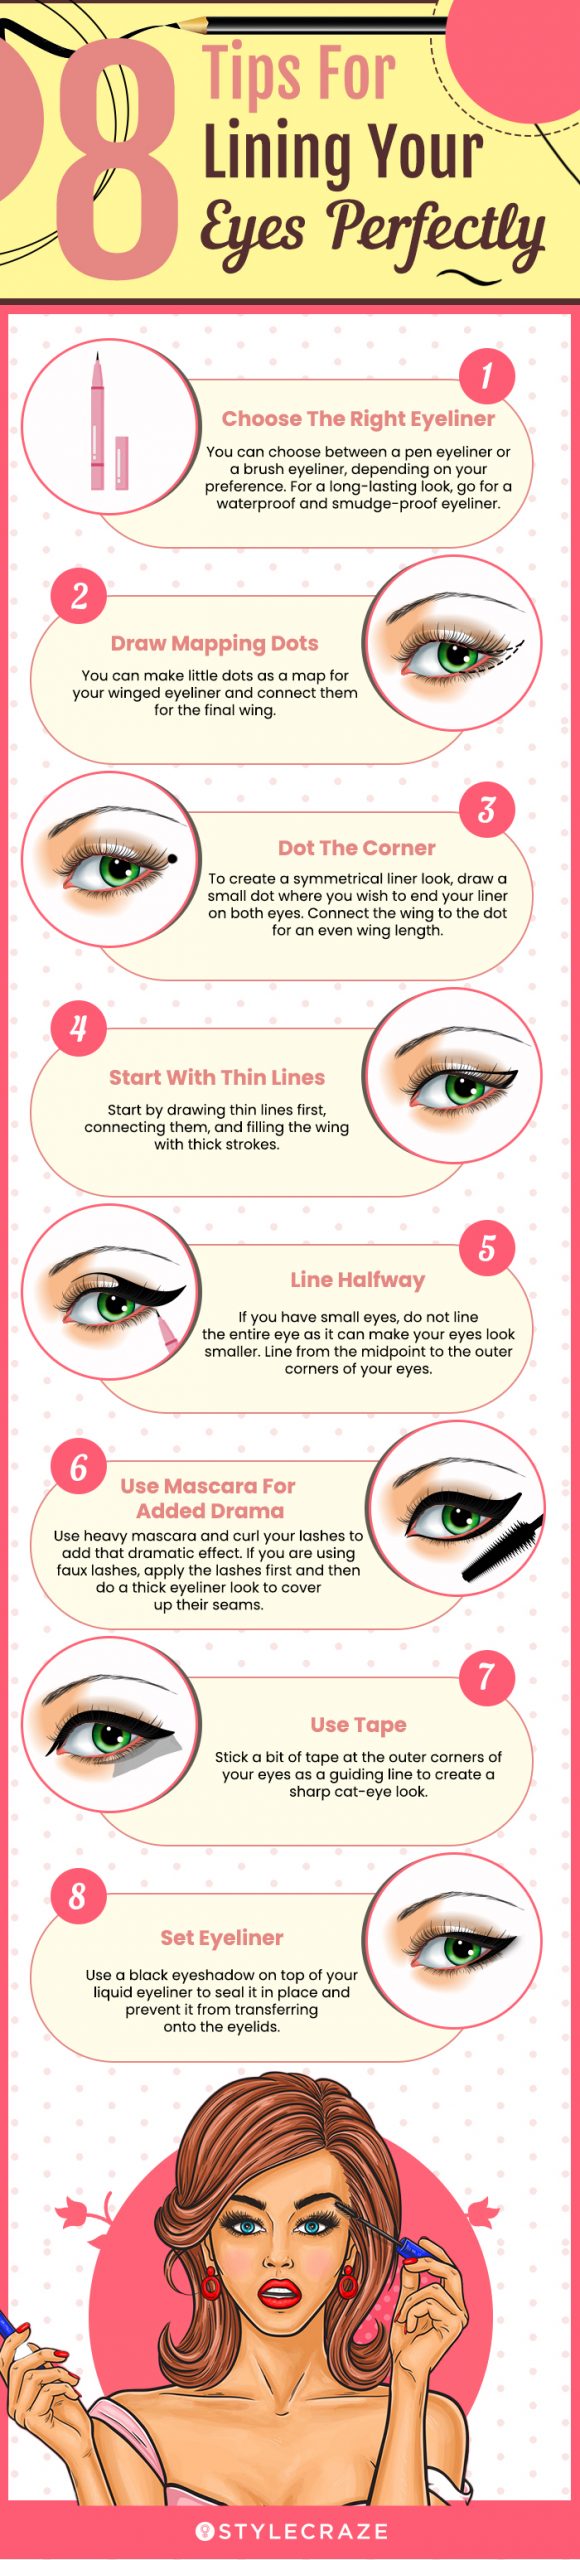 8 tips for lining your eyes perfectly (infographic) 